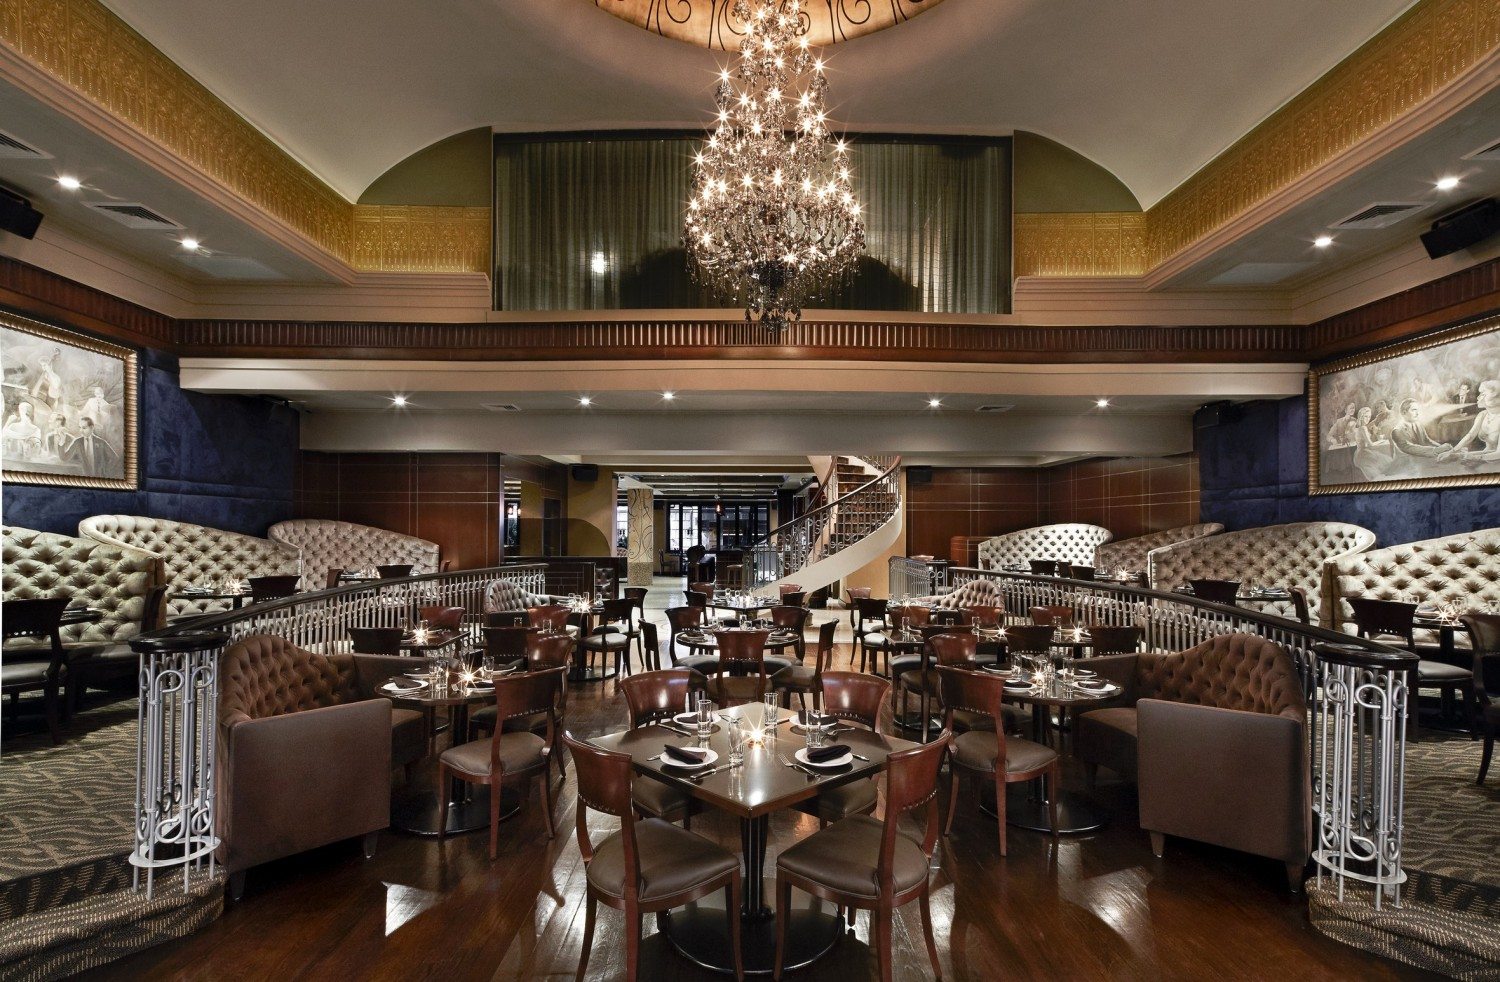 Empire Steak House: Old New York Elegance With Top Shelf Food and Service